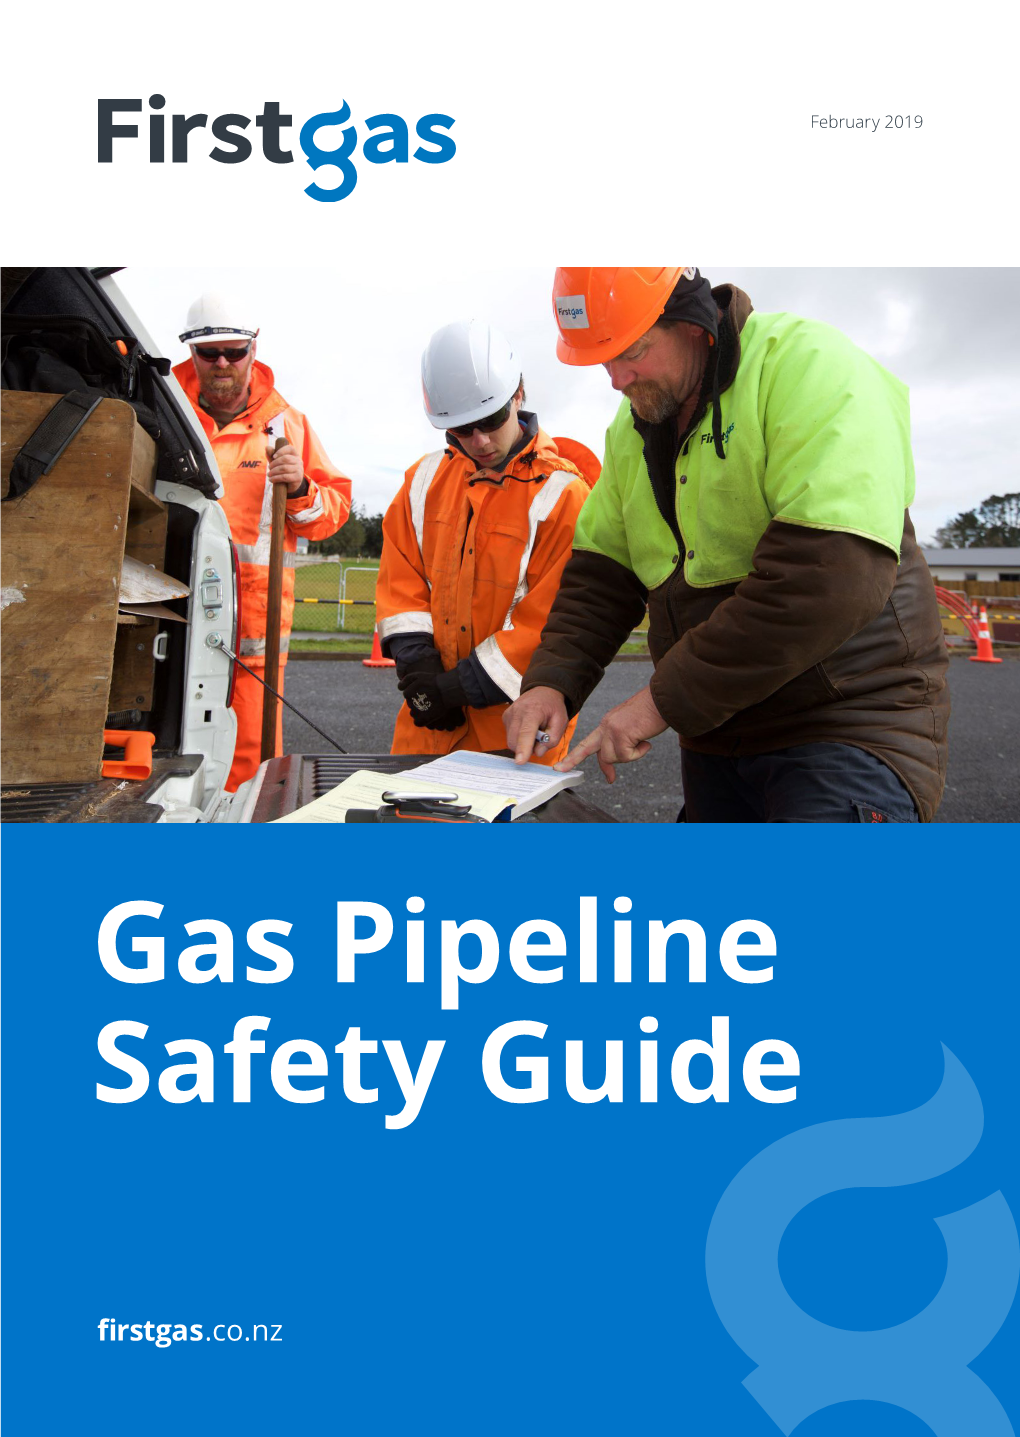 Gas Pipeline Safety Guide at First Gas We Want to Keep All Contents Contractors, Customers and the First Gas’ Services to Help You Work Safely 04 Public Safe